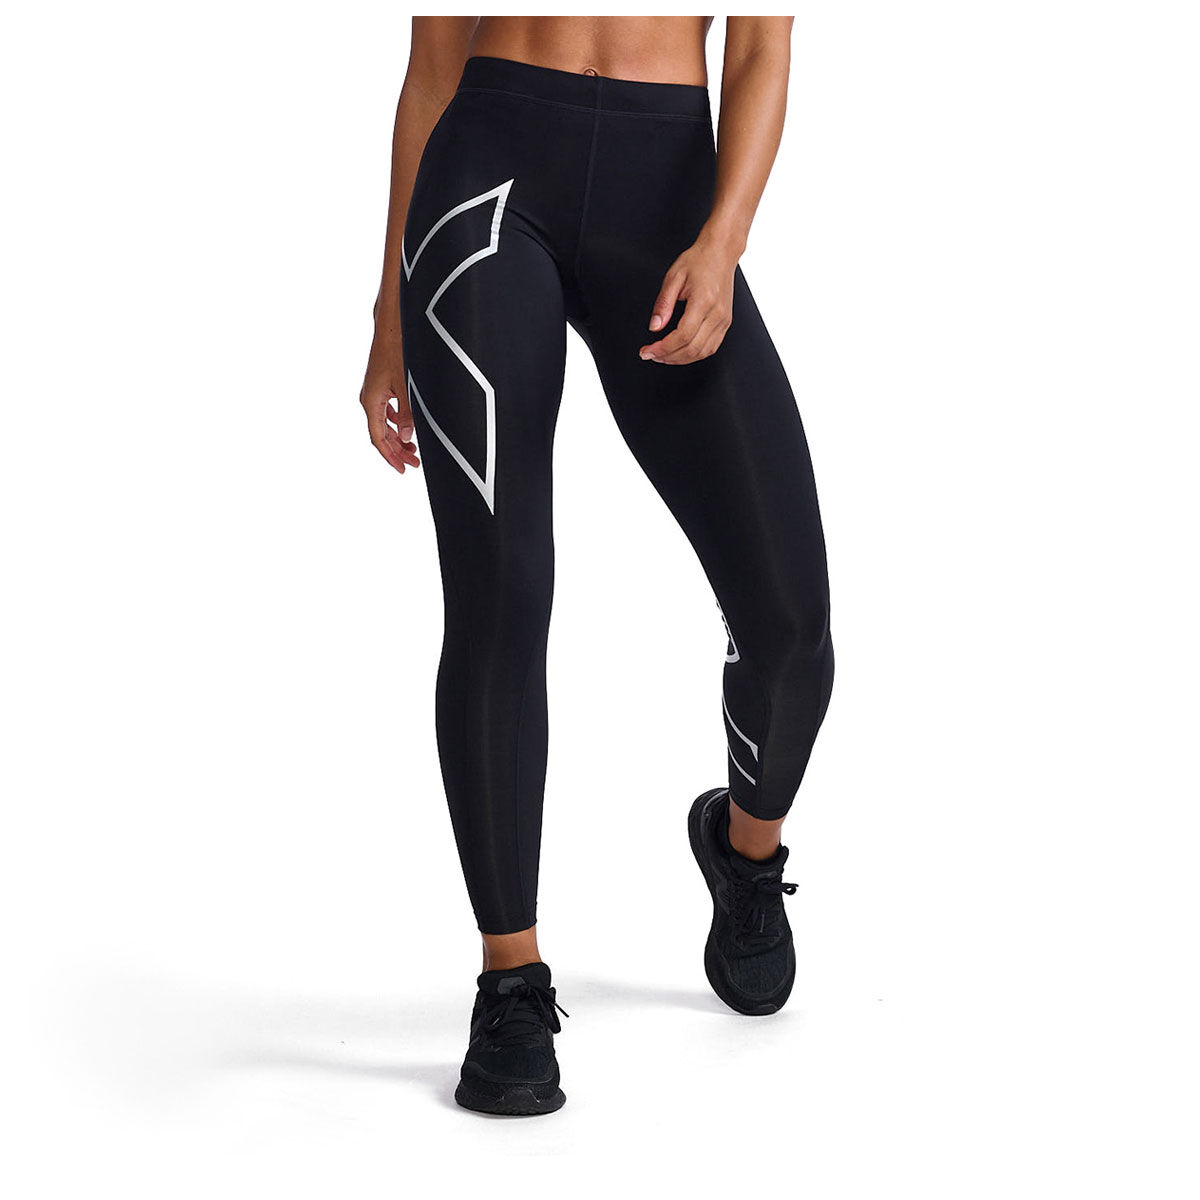 Women's Compression Clothing | Tights, Shorts & Tops | rebel